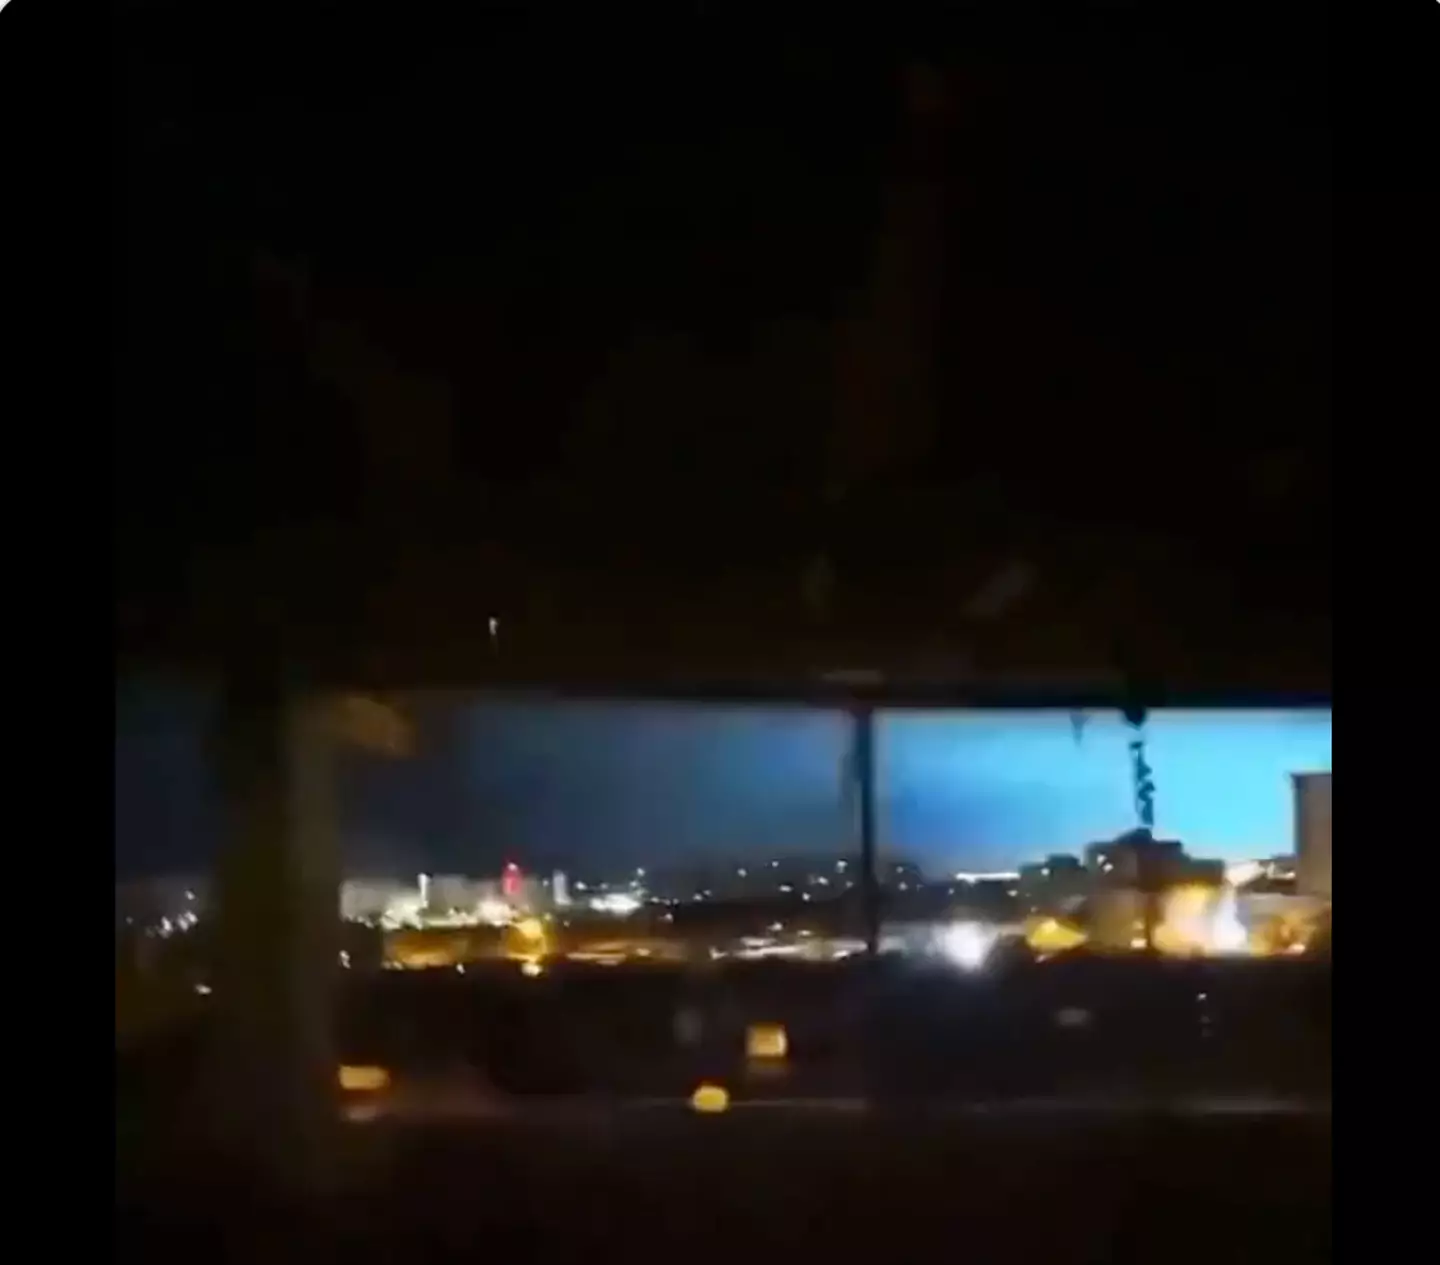 The strange lights seen in Morocco are known as 'earthquake lights'.